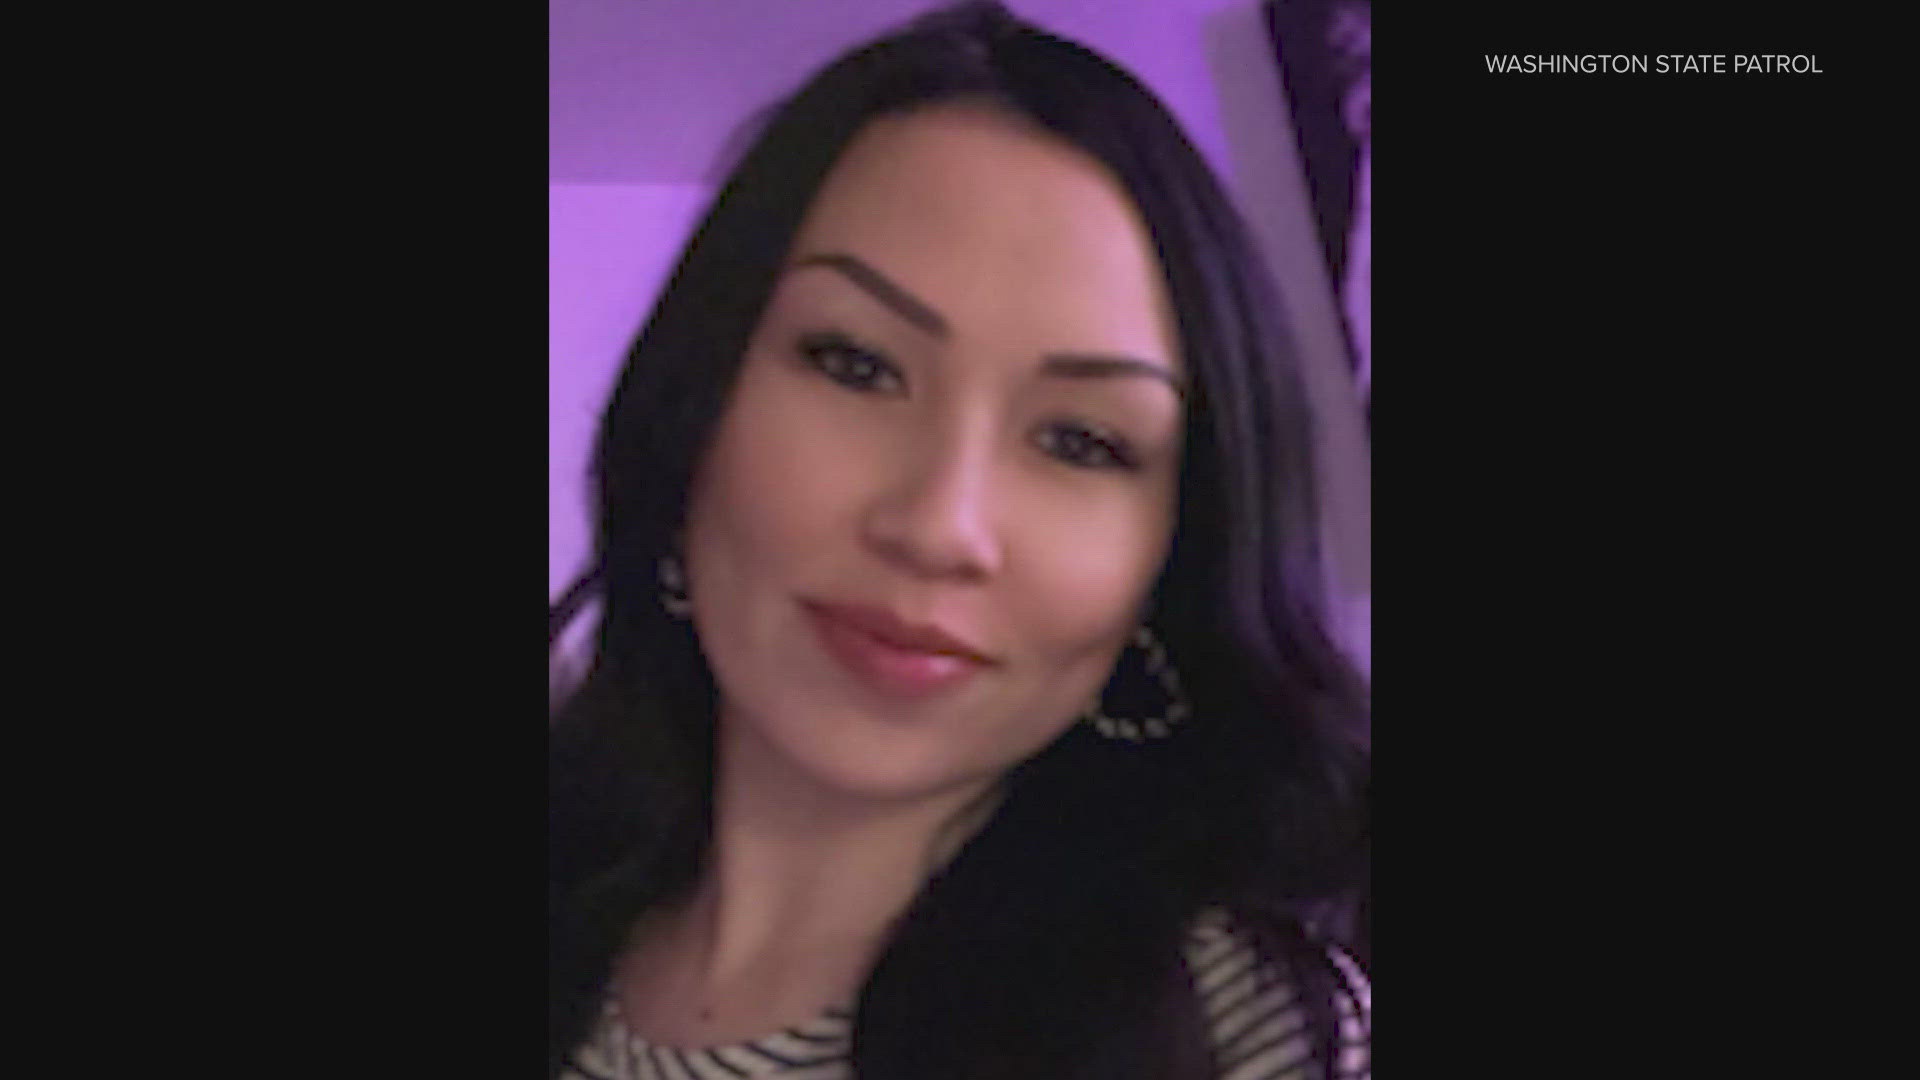 Washington State Patrol says 38-year-old Amanda Pakootas unwillingly left a friend's home in Airway Heights and hasn't been seen since